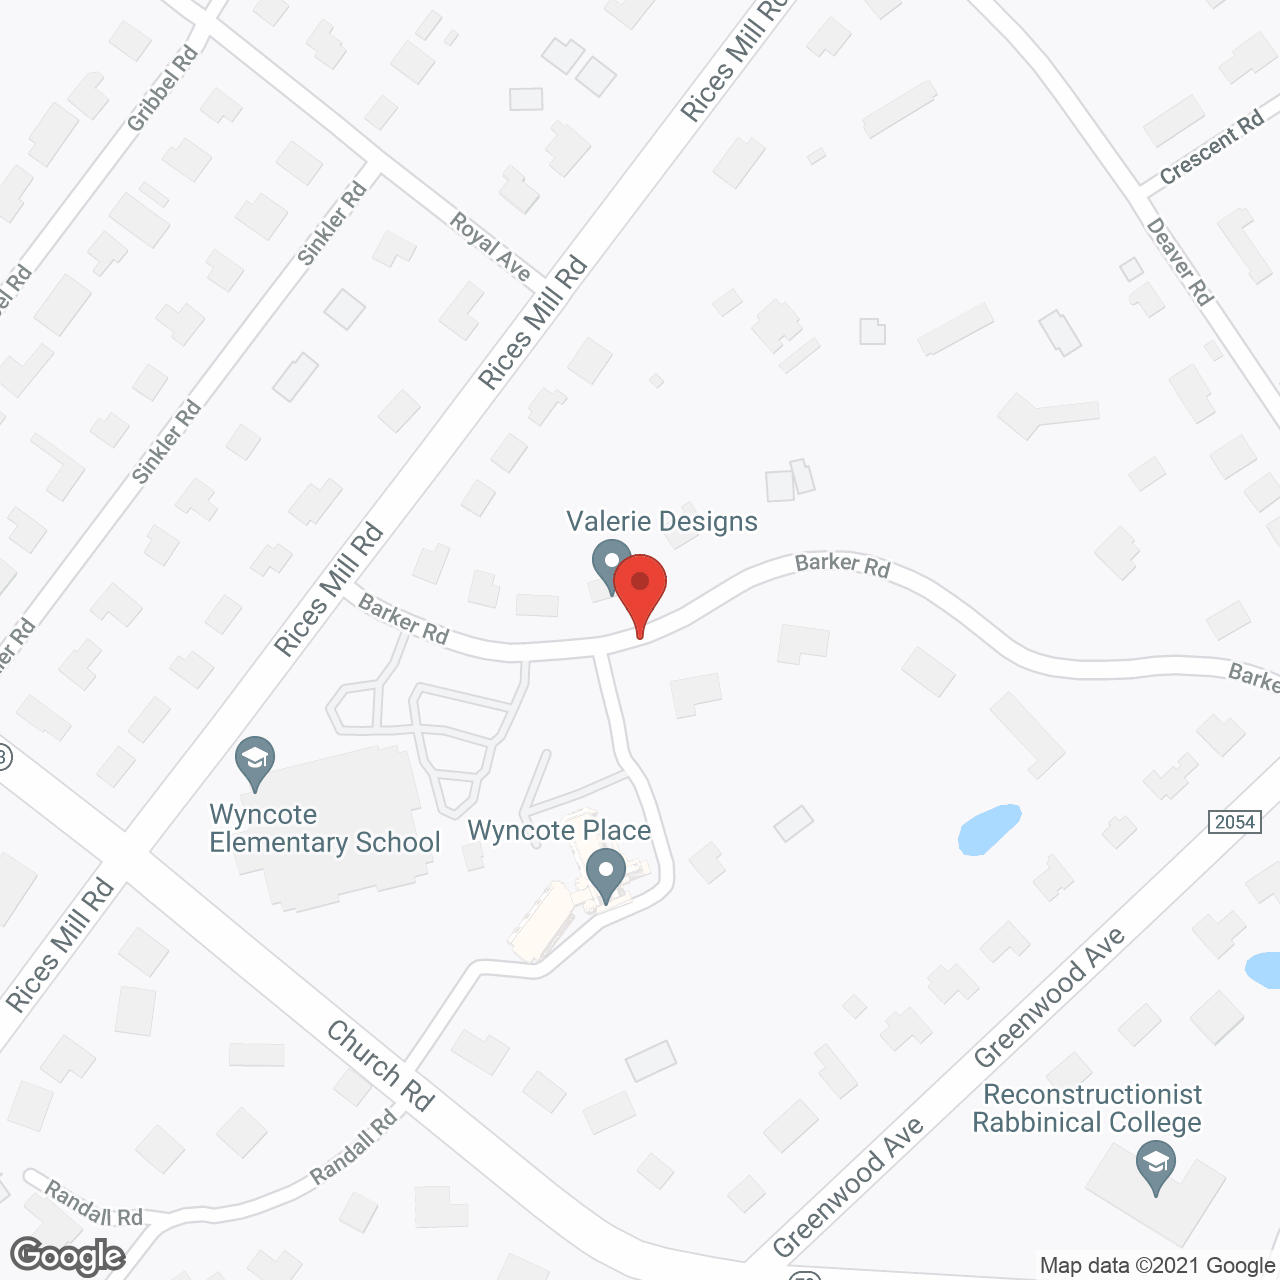 Wyncote Place Memory Care Community in google map